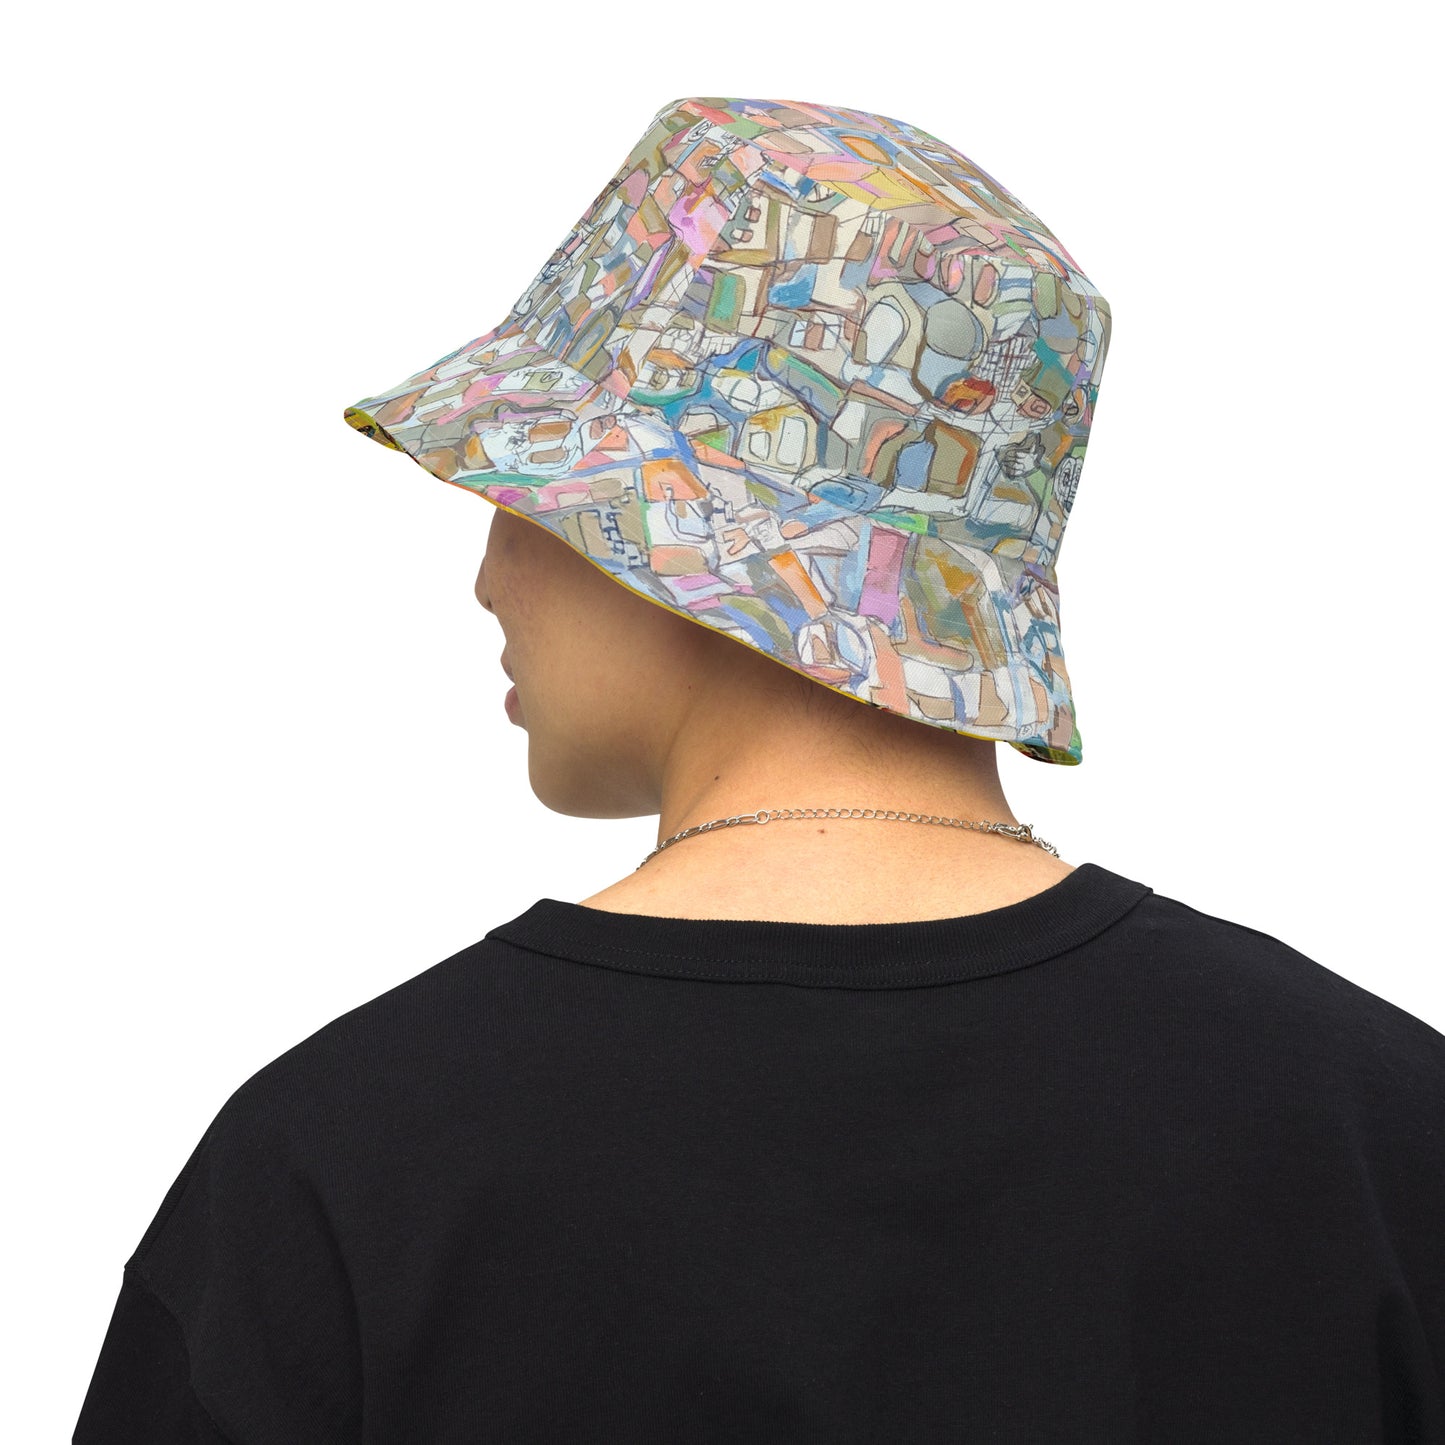 No In No Out/Urban Landscape: Reversible bucket hat